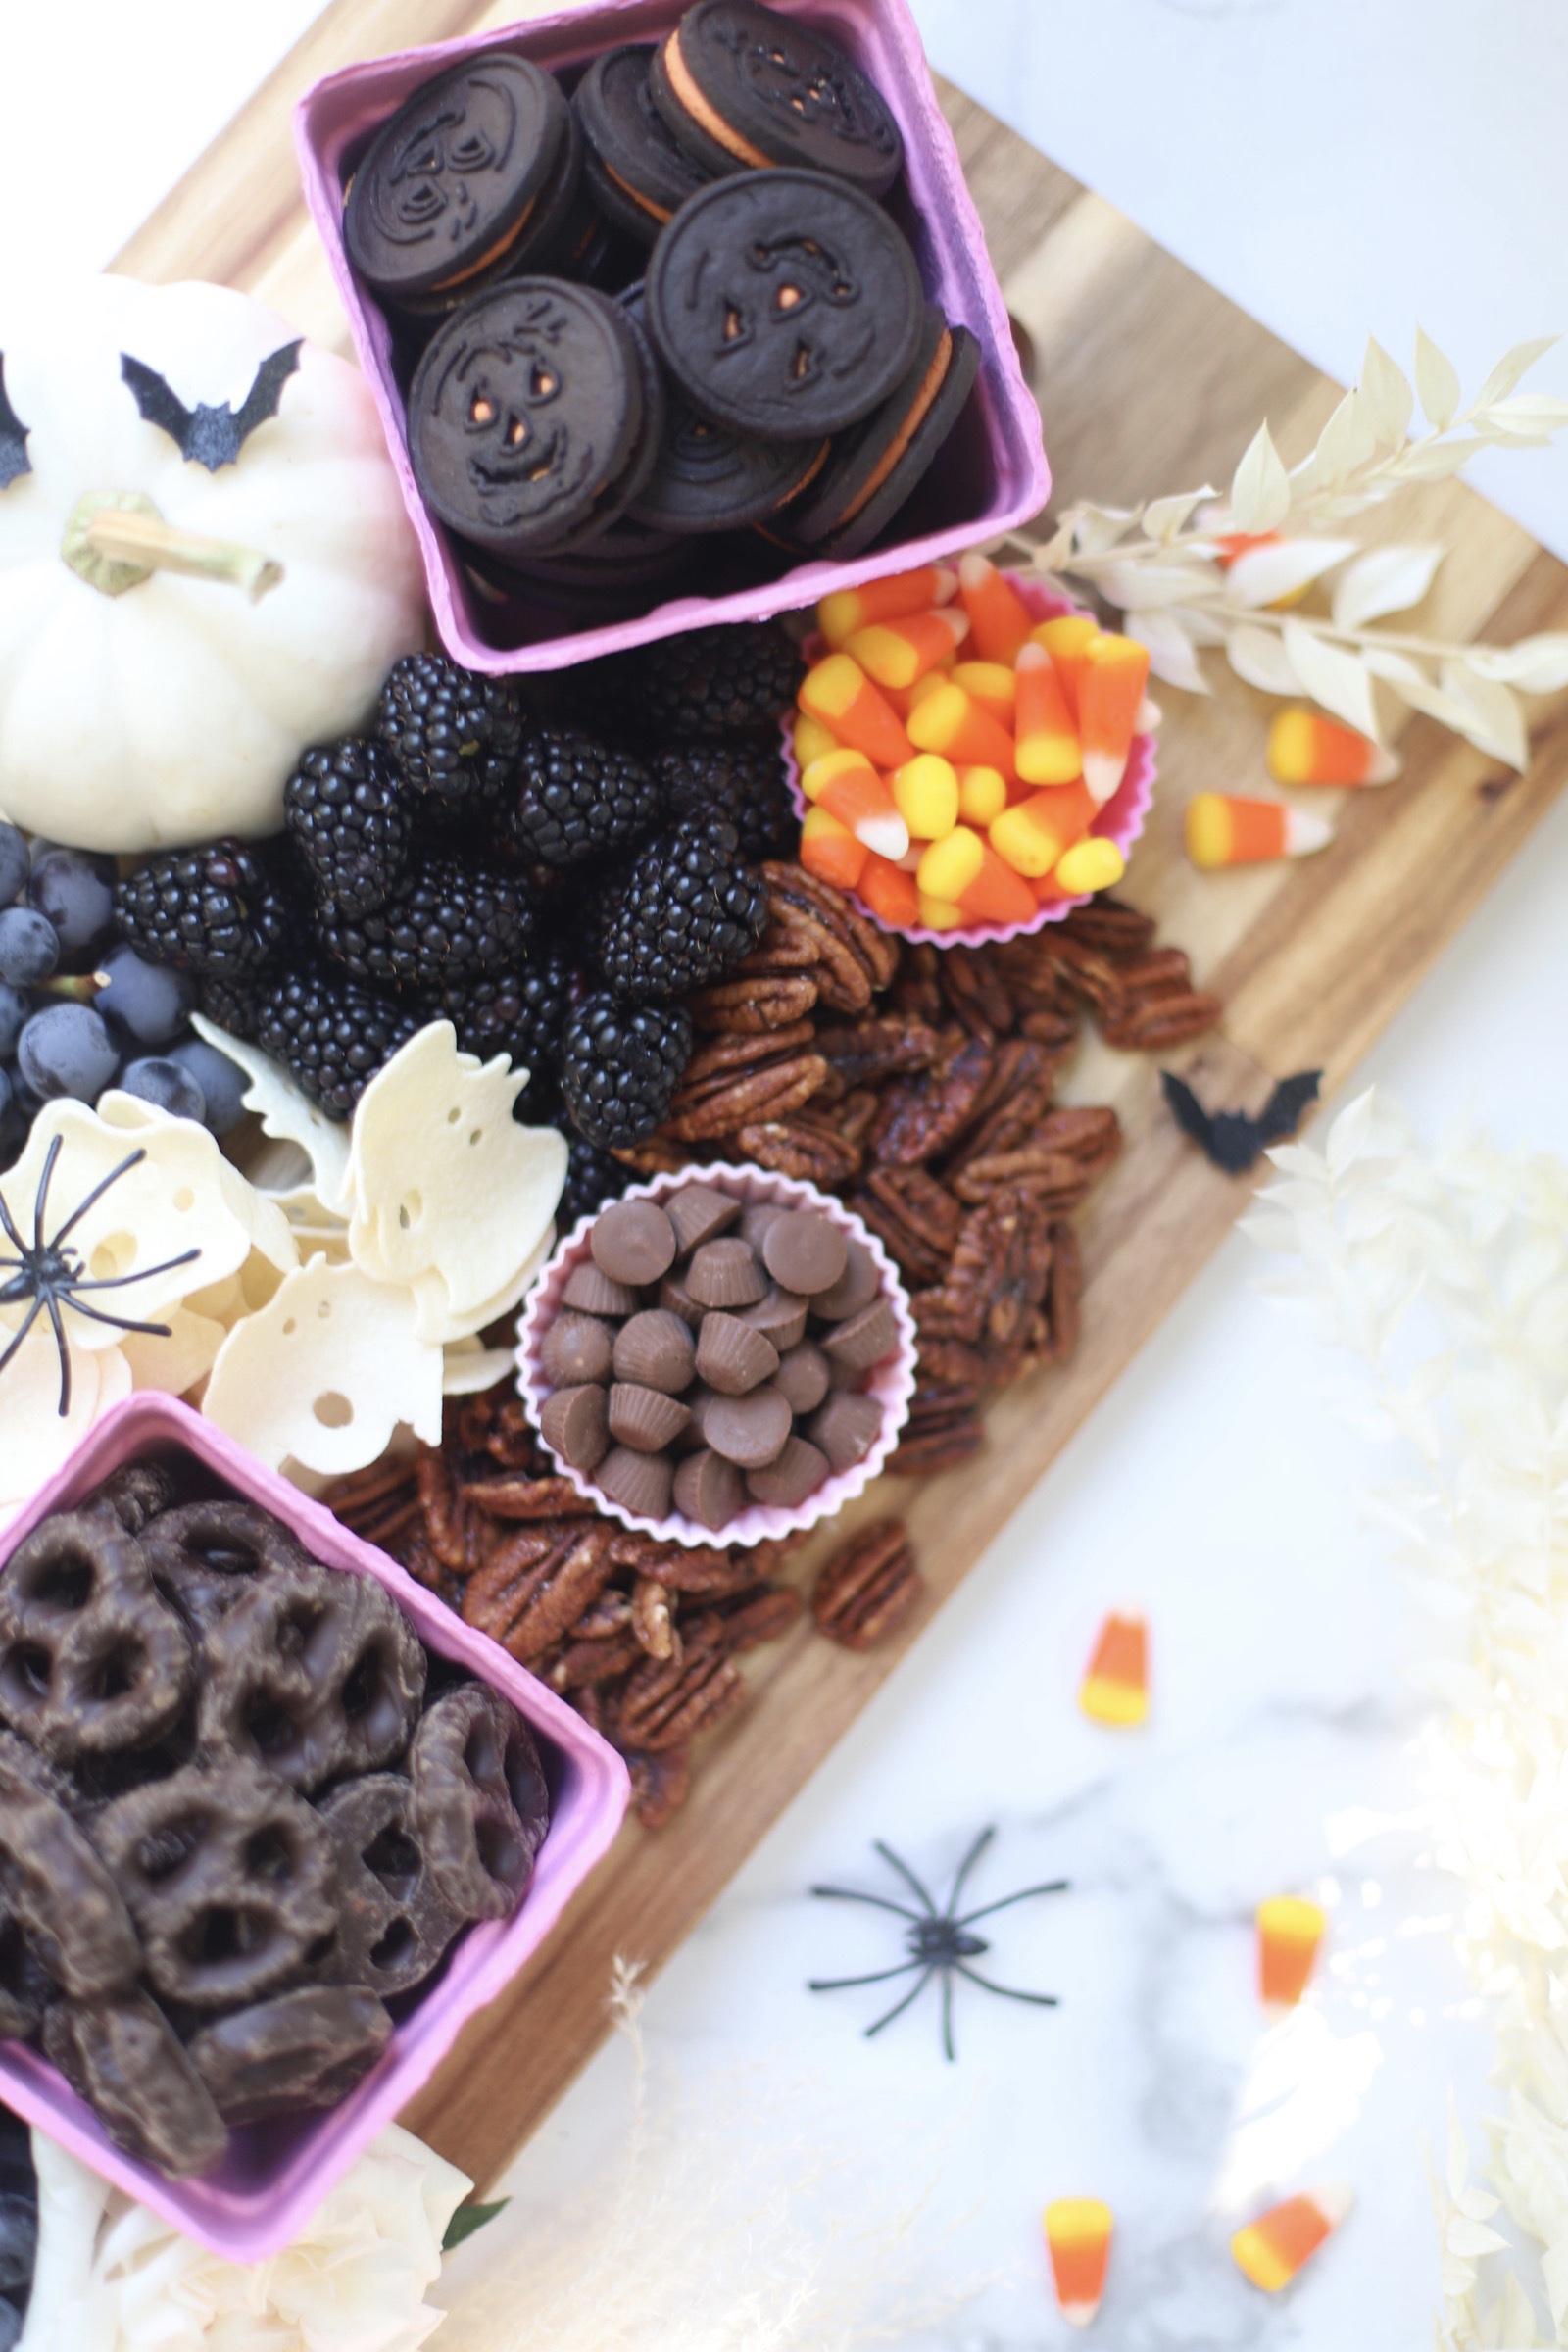 Serve a beautifully spooky Halloween charcuterie board chock full of snacks the whole family will love! This frightfully delicious snack board is perfect for Halloween celebrations, a no-fuss dinner after a night of trick-or-treating, even a festive afternoon snack throughout the month of October. Happy snacking! | glitterinc.com | @glitterinc